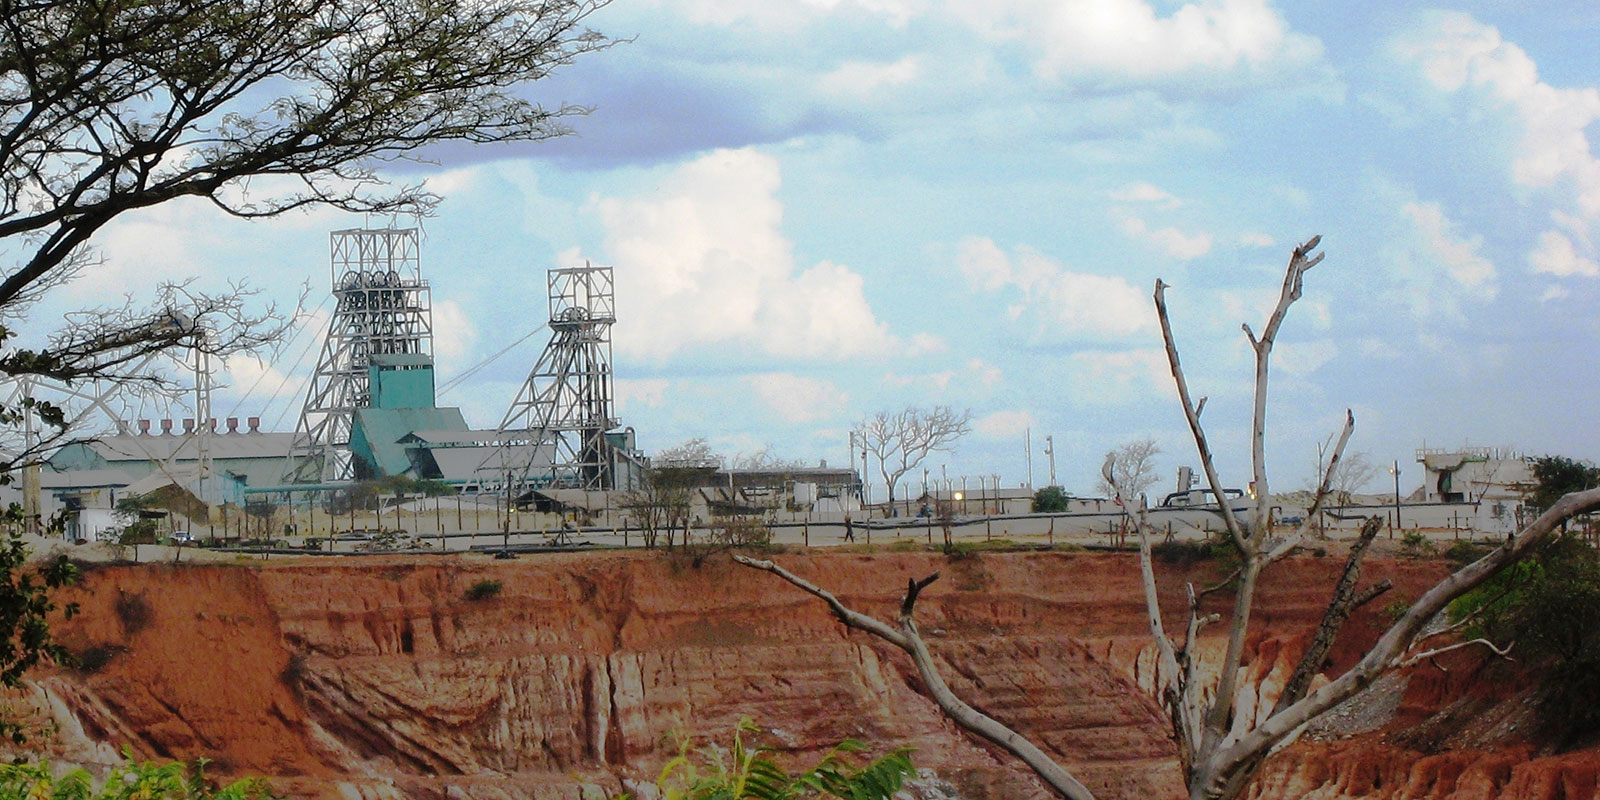 Nkana open pit in Kitwe (By Per Arne Wilson – Own work, CC BY-SA 3.0)